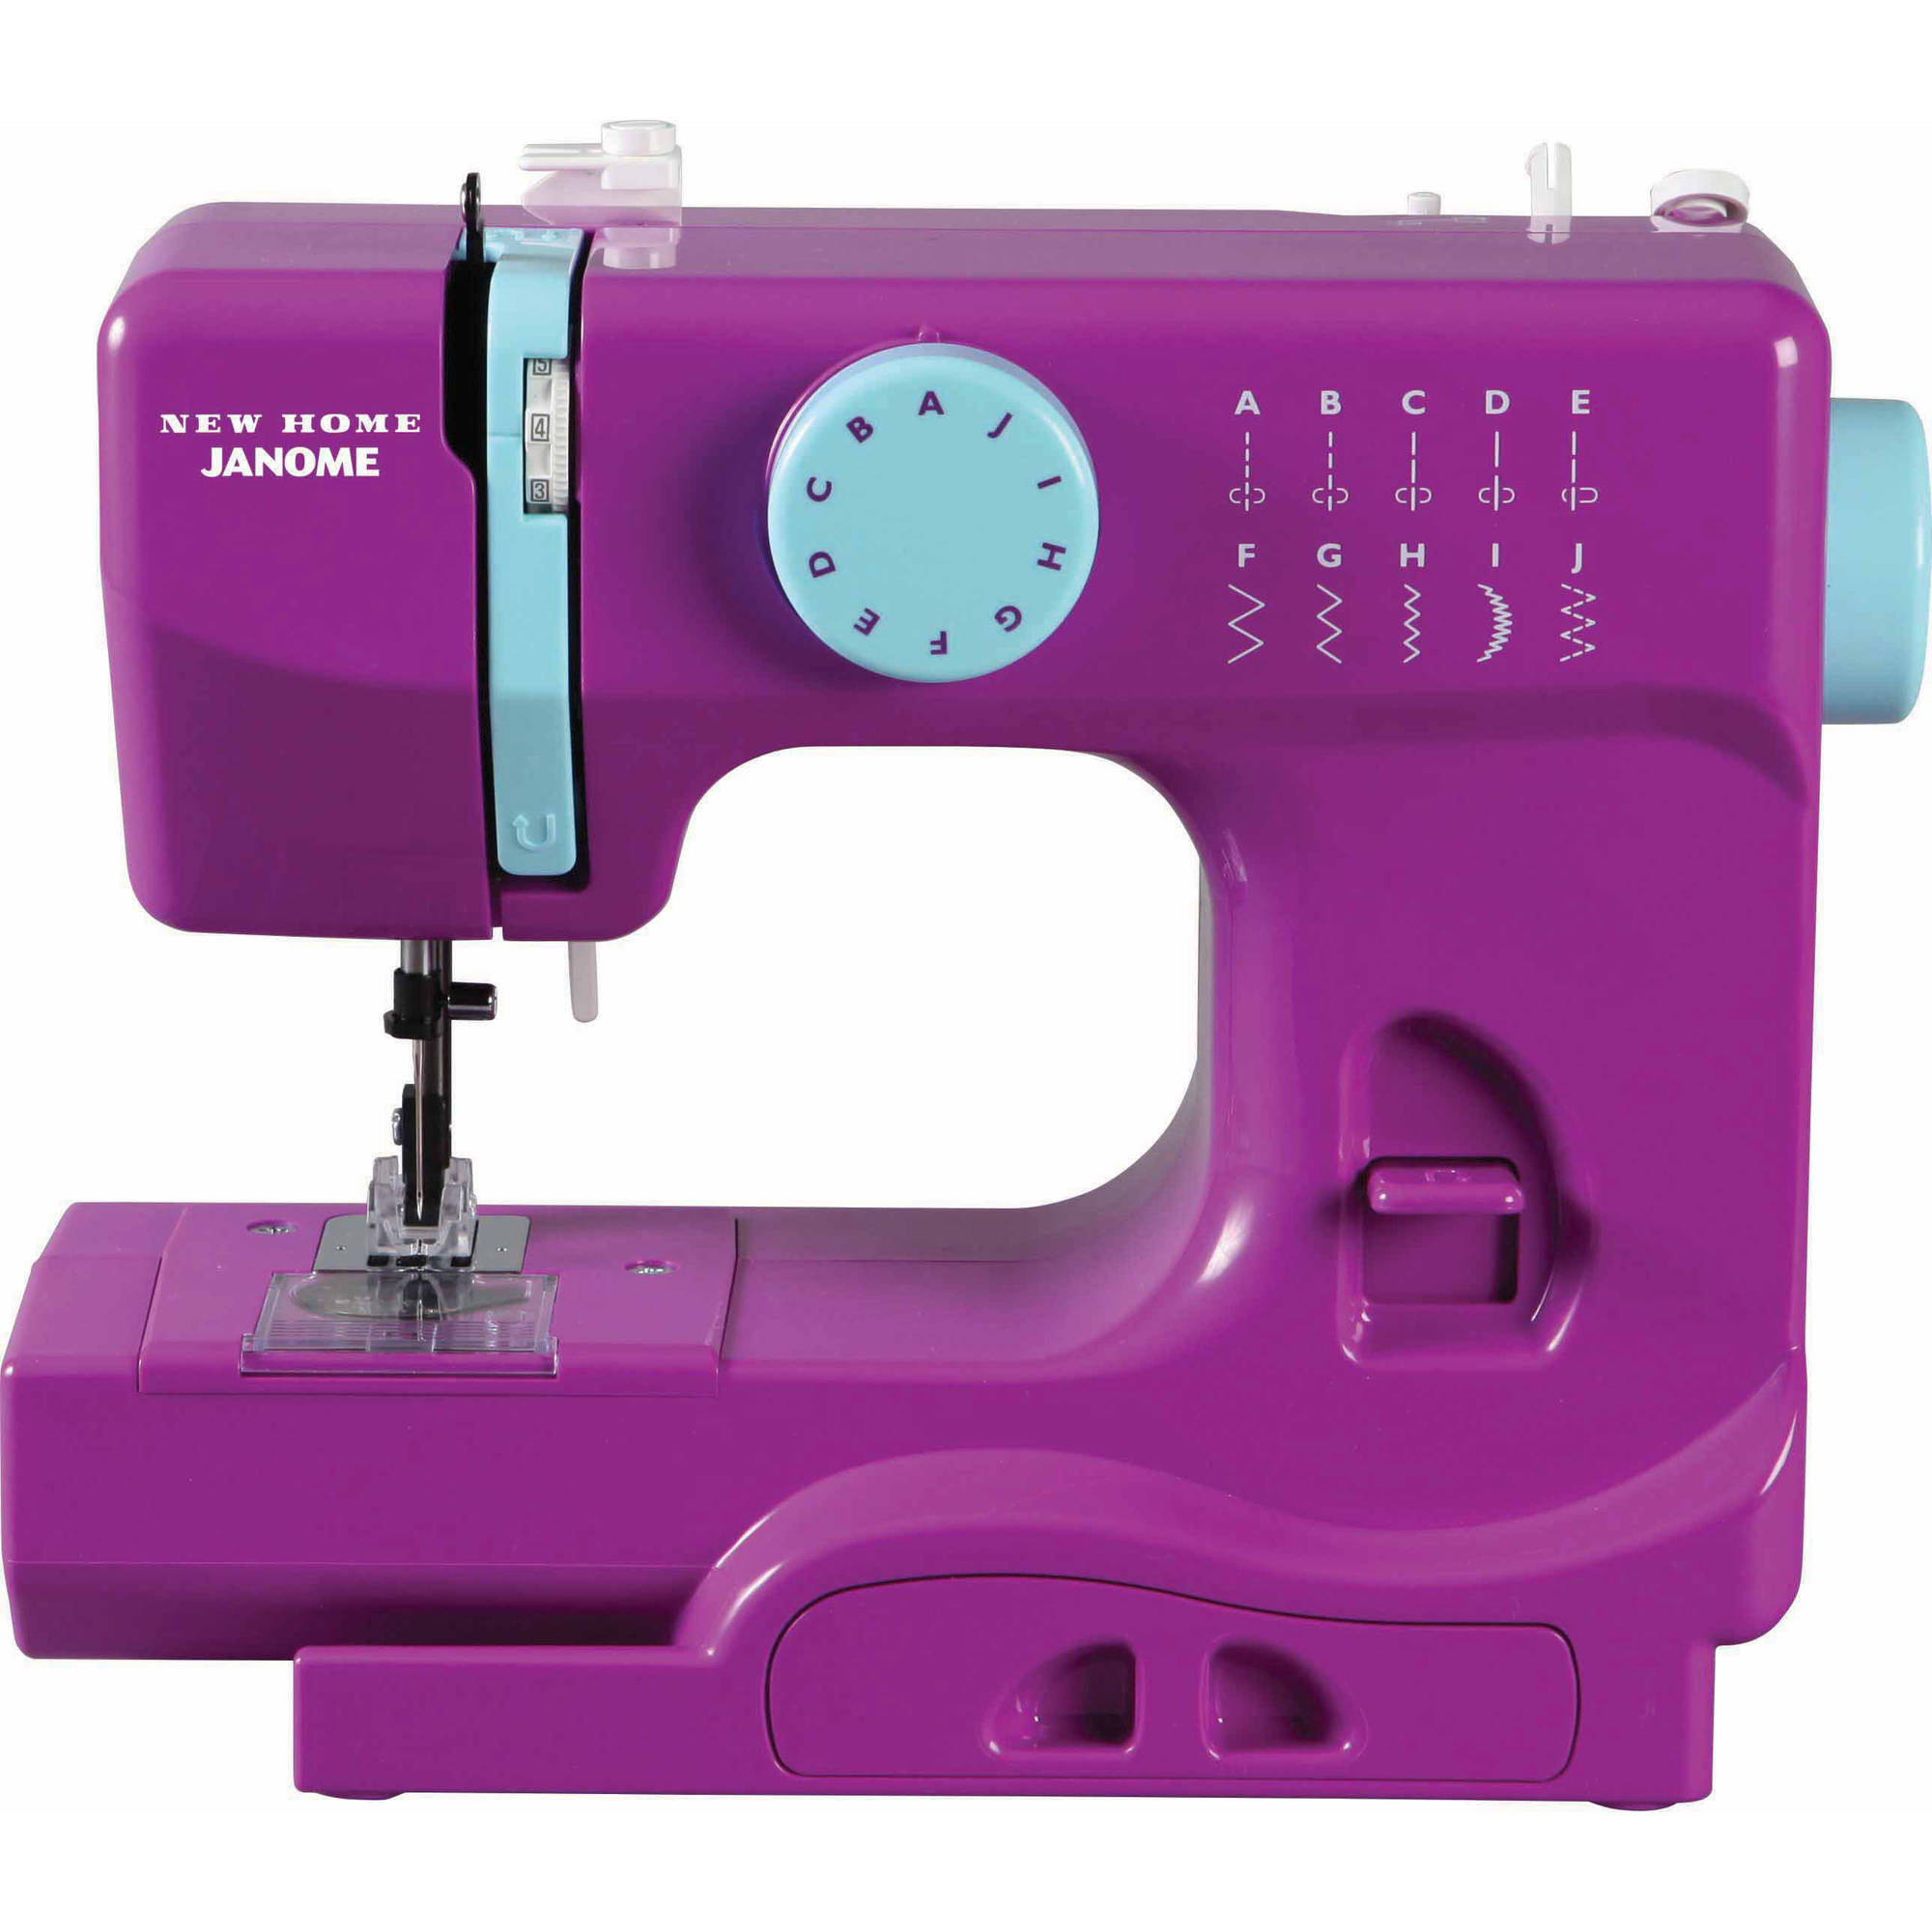 Janome Basic 10-Stitch Portable Sewing Machine with Top Drop-In Bobbin, 4-Piece Feed Dog and Accessory Storage, Purple Thunder - image 1 of 10